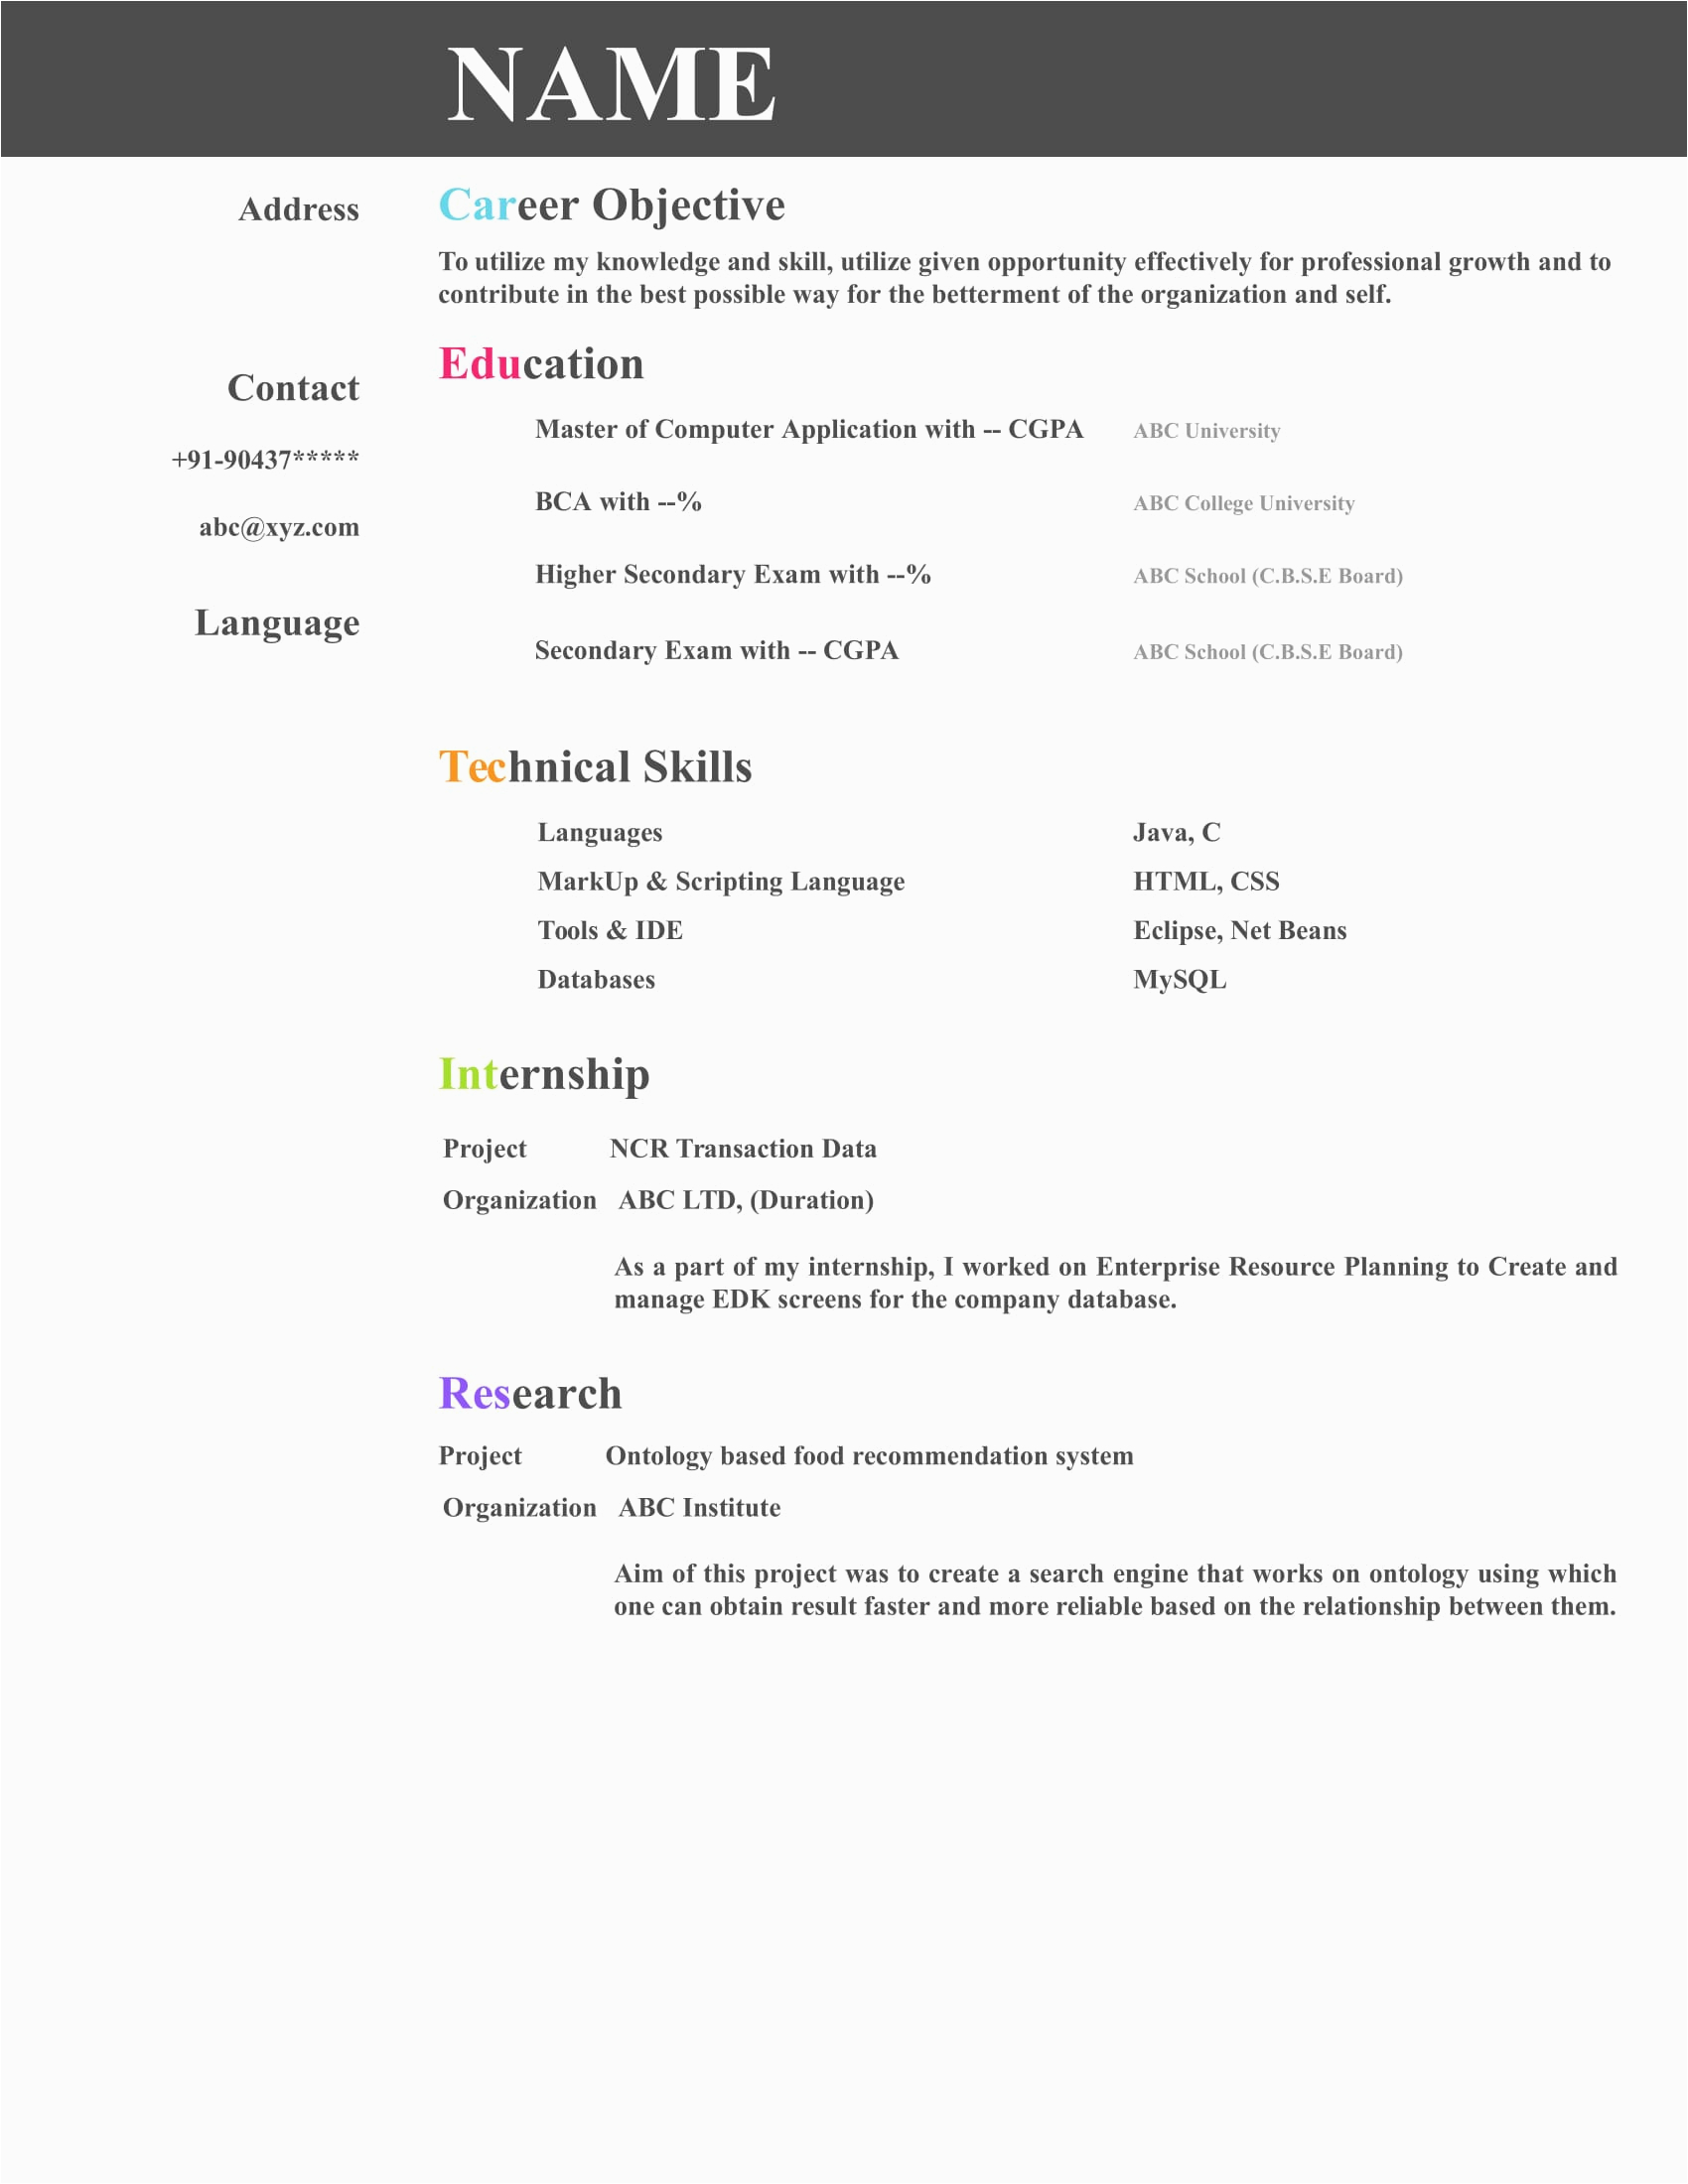 Sample Resume for Freshers Engineers Computer Science Download Resume Templates for Puter Science Engineer Freshers